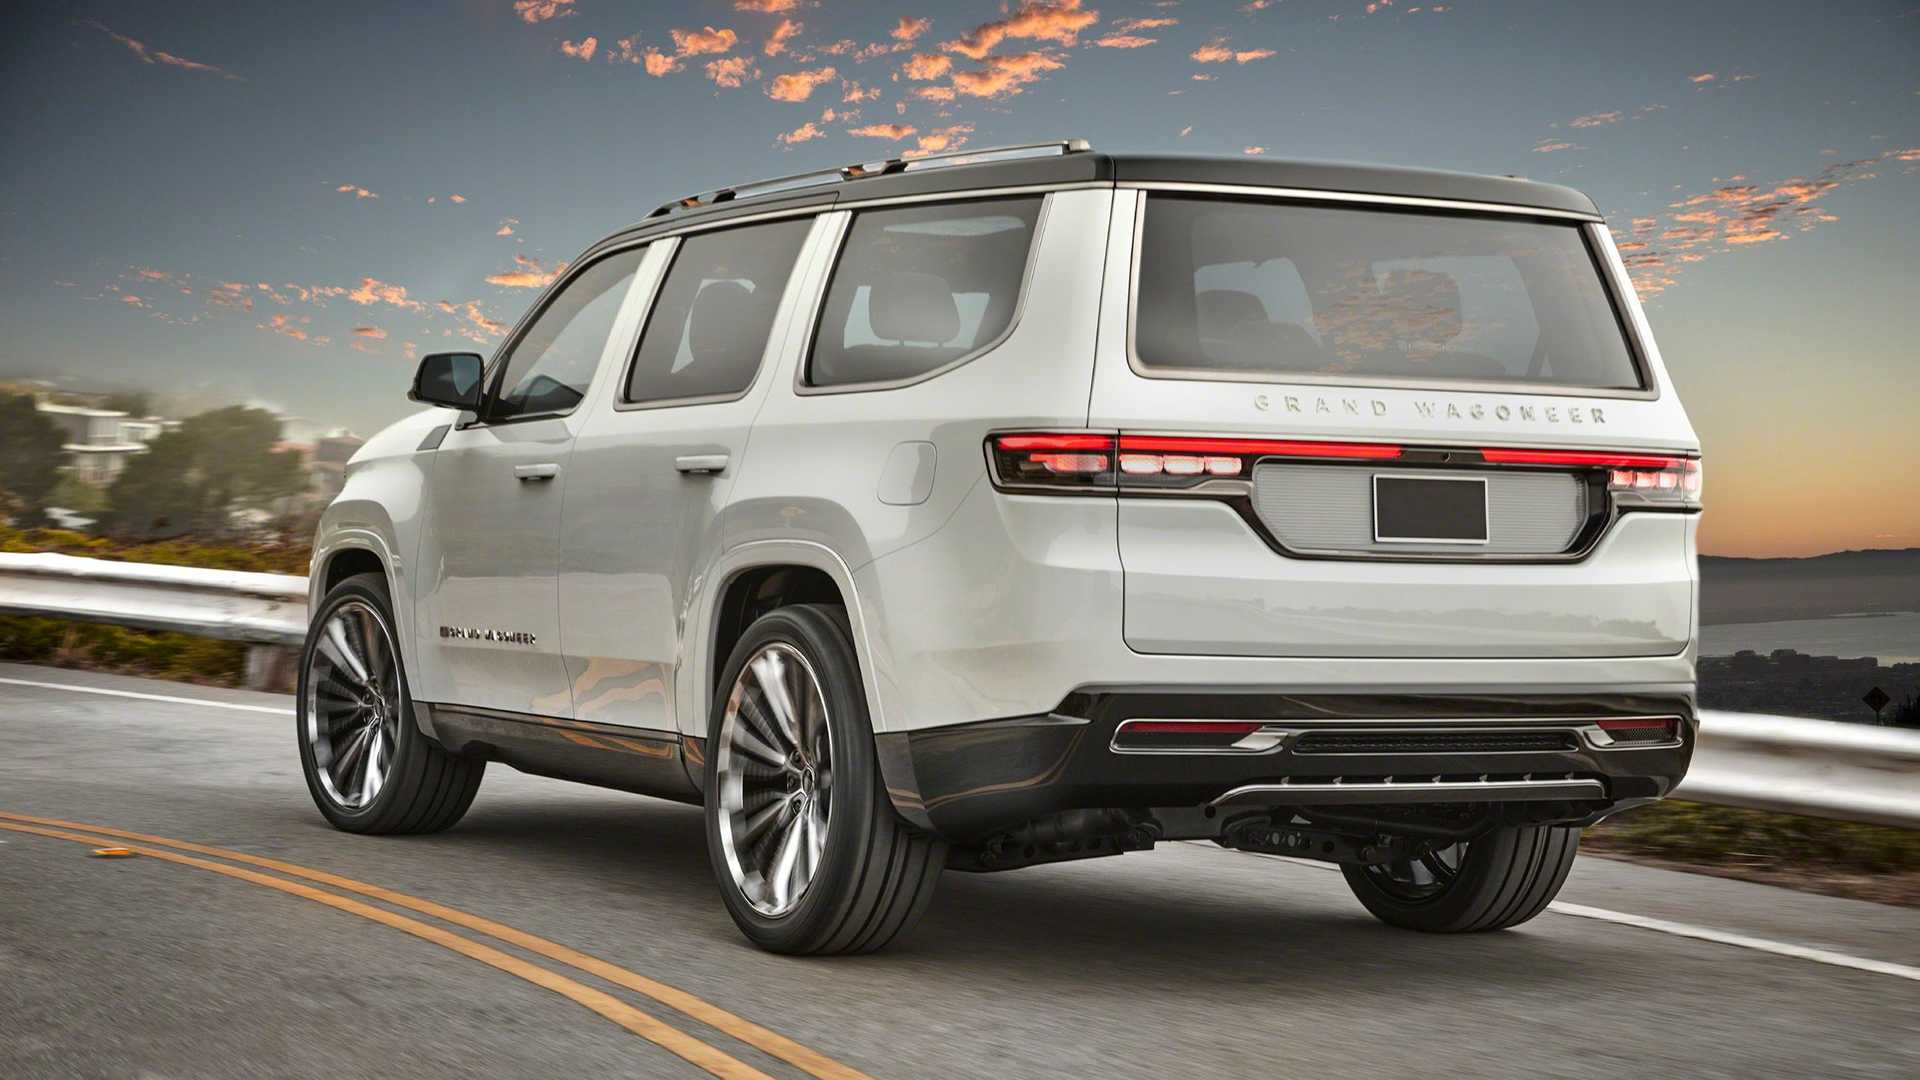 The New Jeep Grand Wagoneer Concept Has A Passenger-Side Screen And Loads Of Chrome